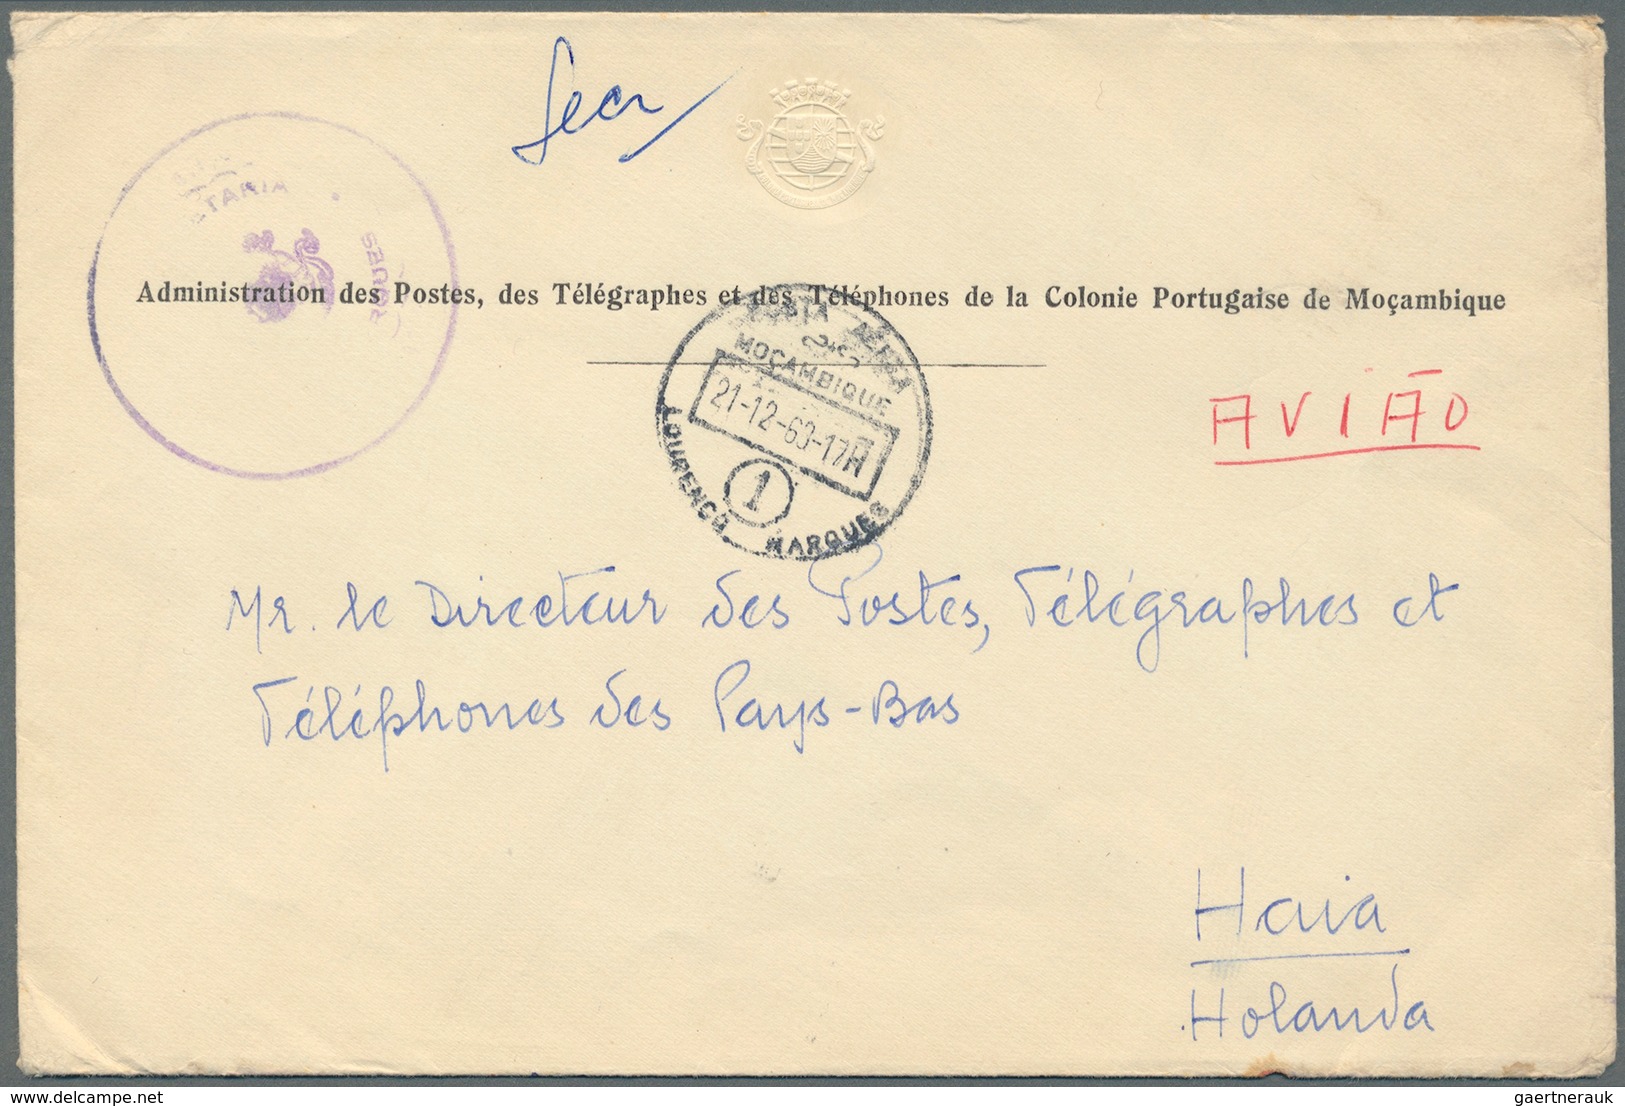 Mocambique: 1894/1985, 192 covers, cards, ancient picture postcards, arimail, many good postal stati